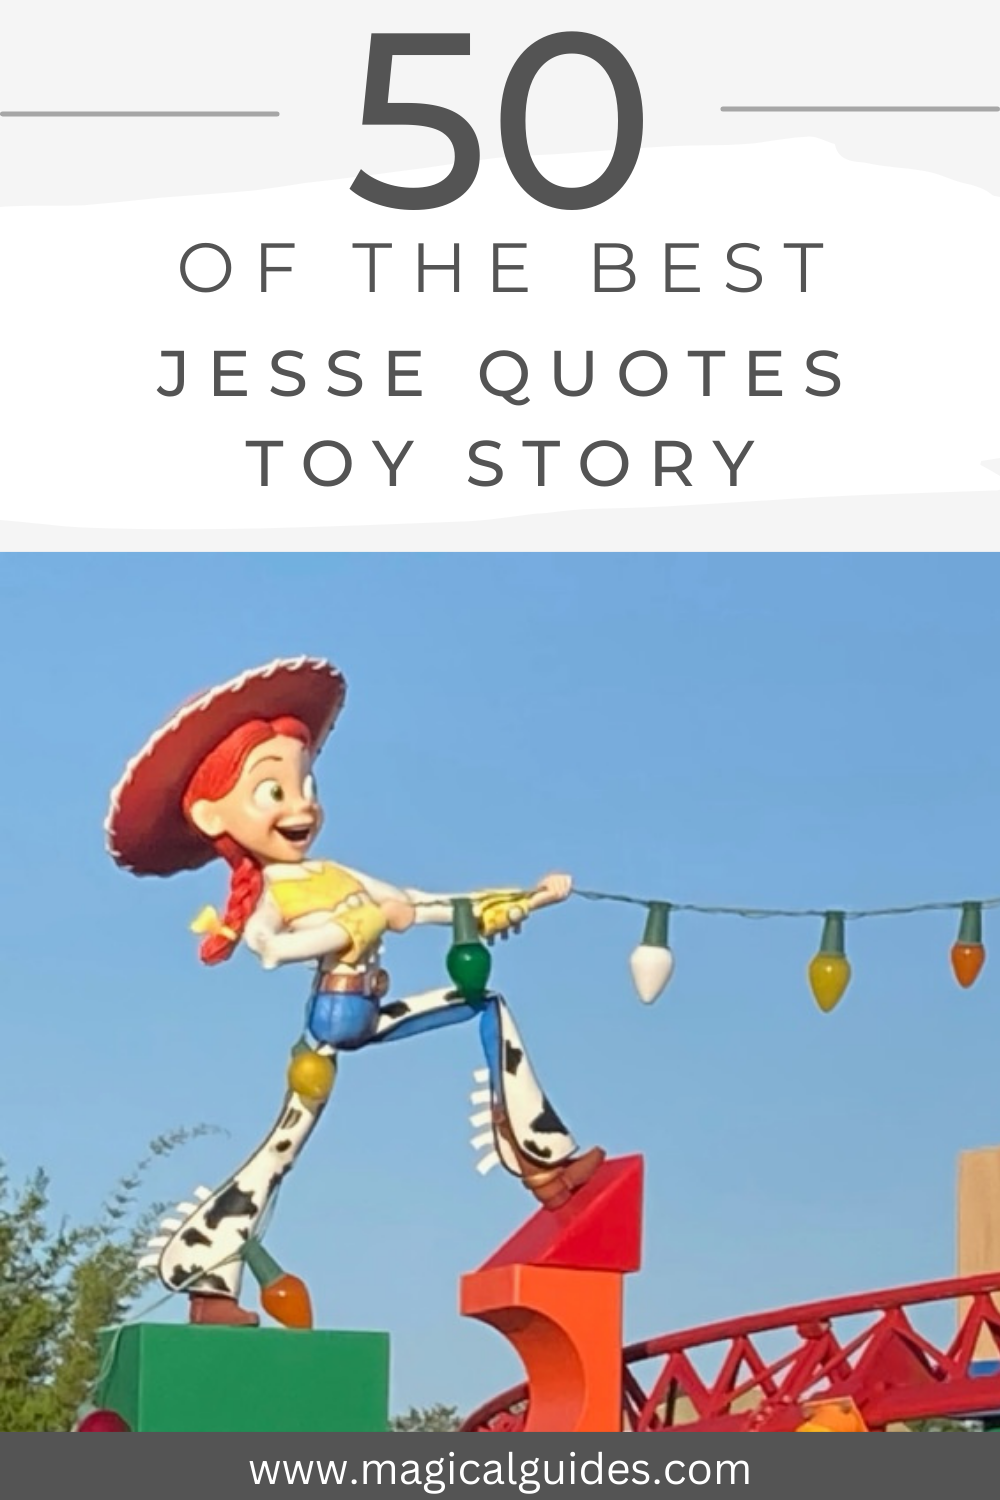 All of the Jesse Quotes for Toy Story fans. 
Toy Story Quotes Inspirational, Toy Story Quotes Love, Toy Story Quotes Friendship, Toy Story Quotes Funny.